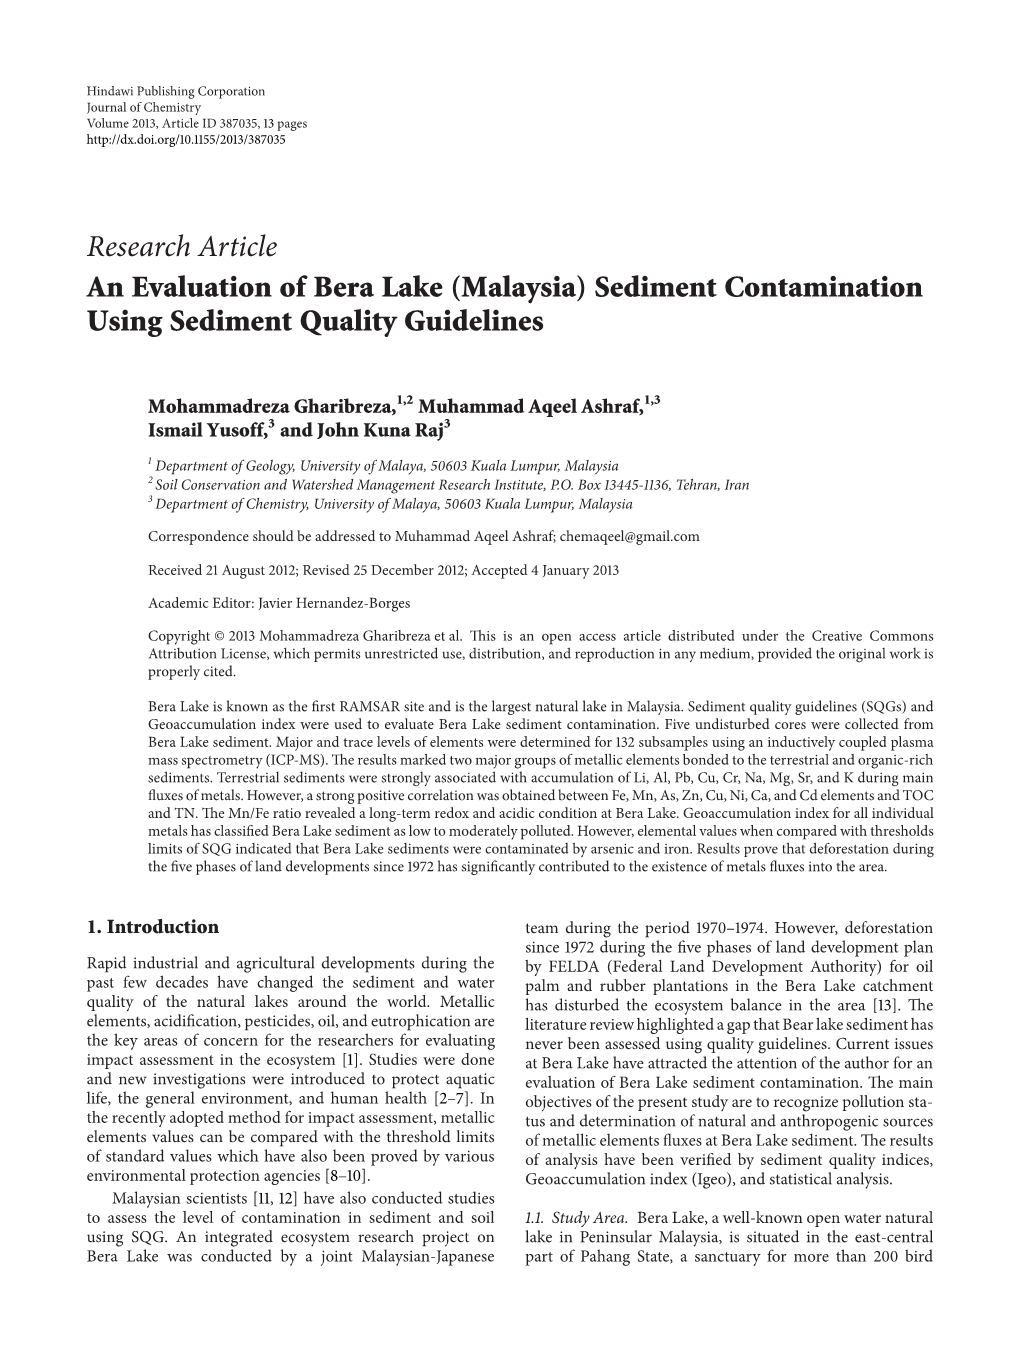 An Evaluation of Bera Lake (Malaysia) Sediment Contamination Using Sediment Quality Guidelines